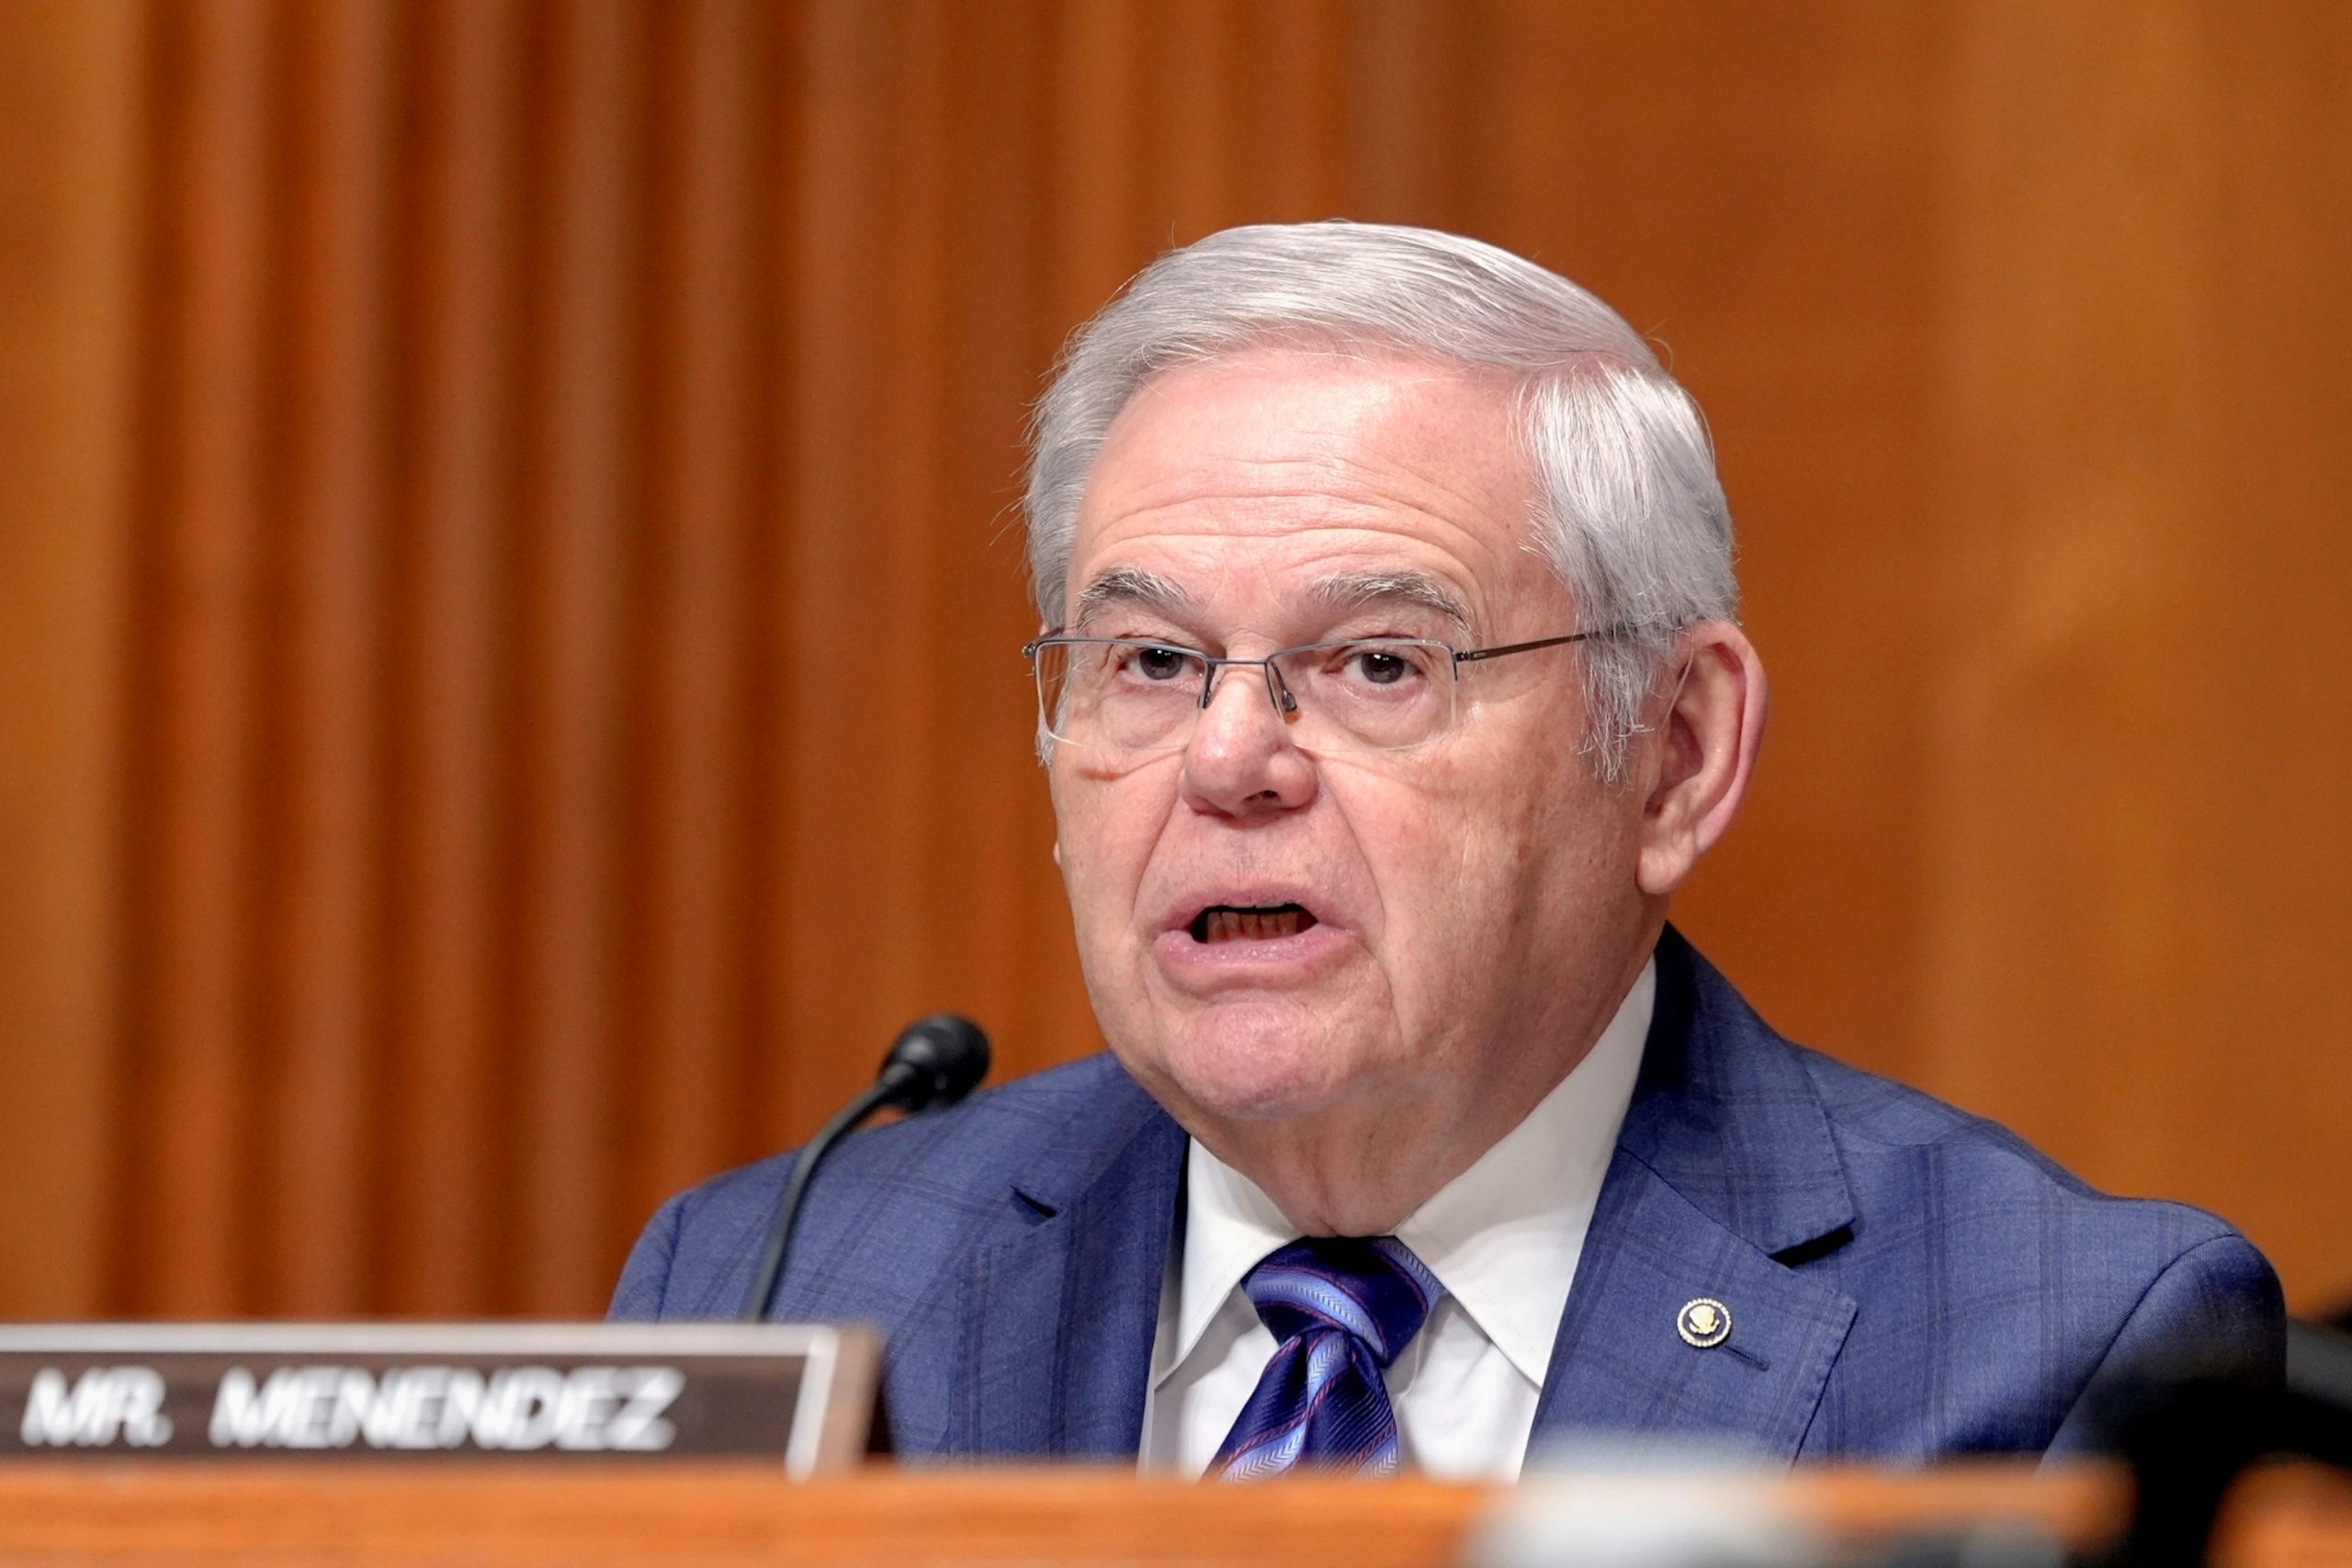 Judge rules to proceed with charges against Sen. Bob Menendez in bribery case